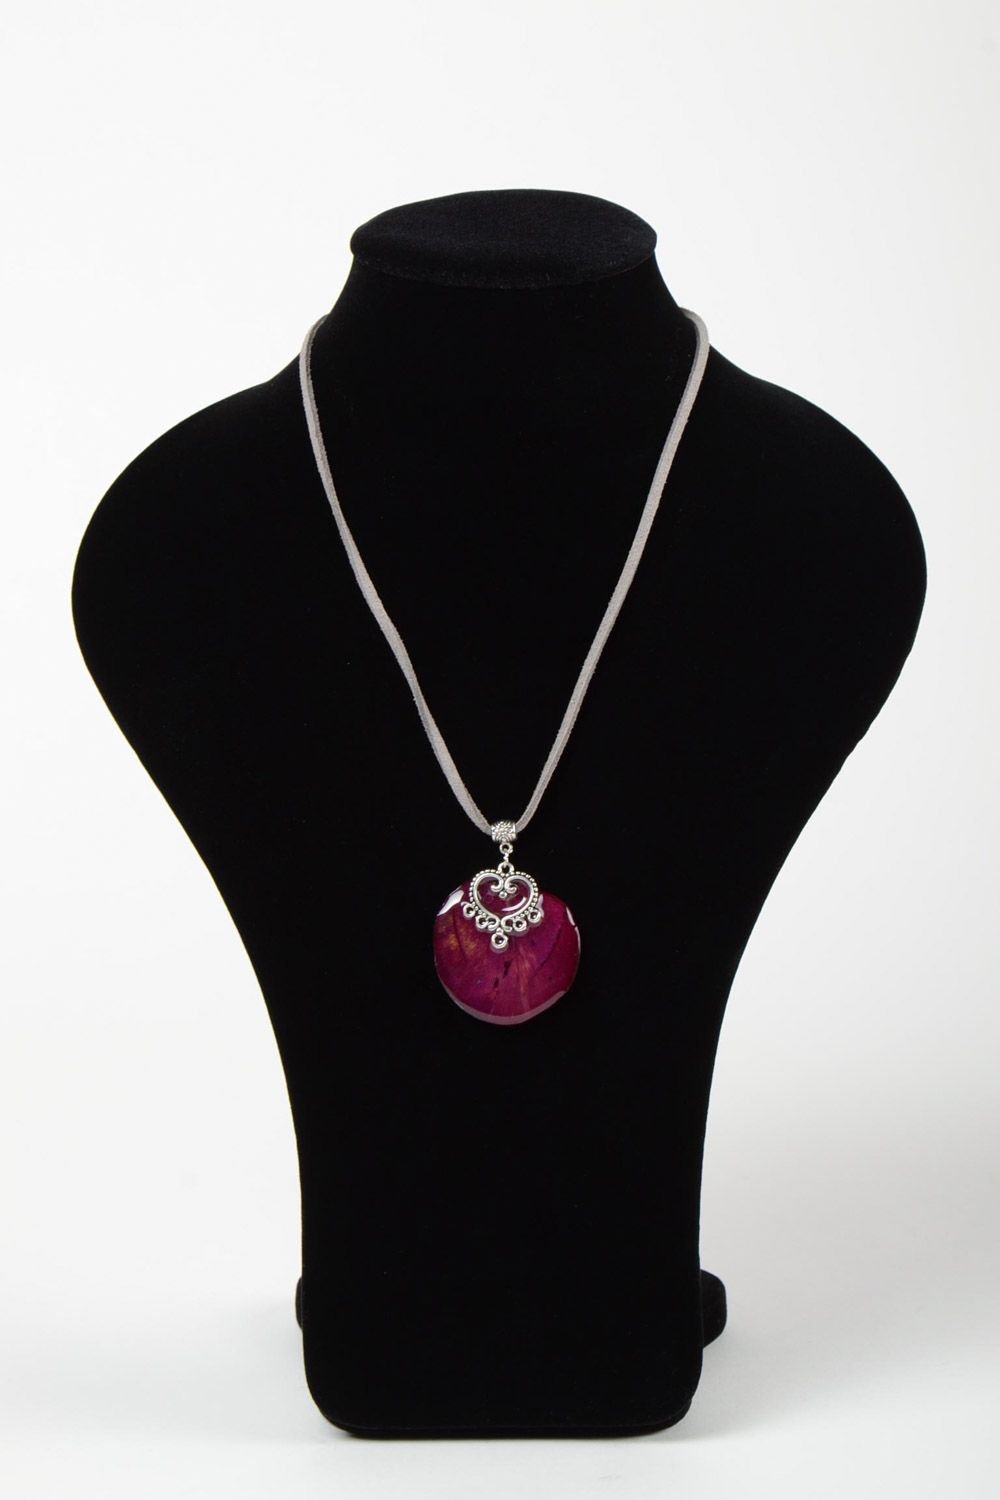 Handmade violet neck pendant on suede cord with flower petal coated with epoxy resin photo 2